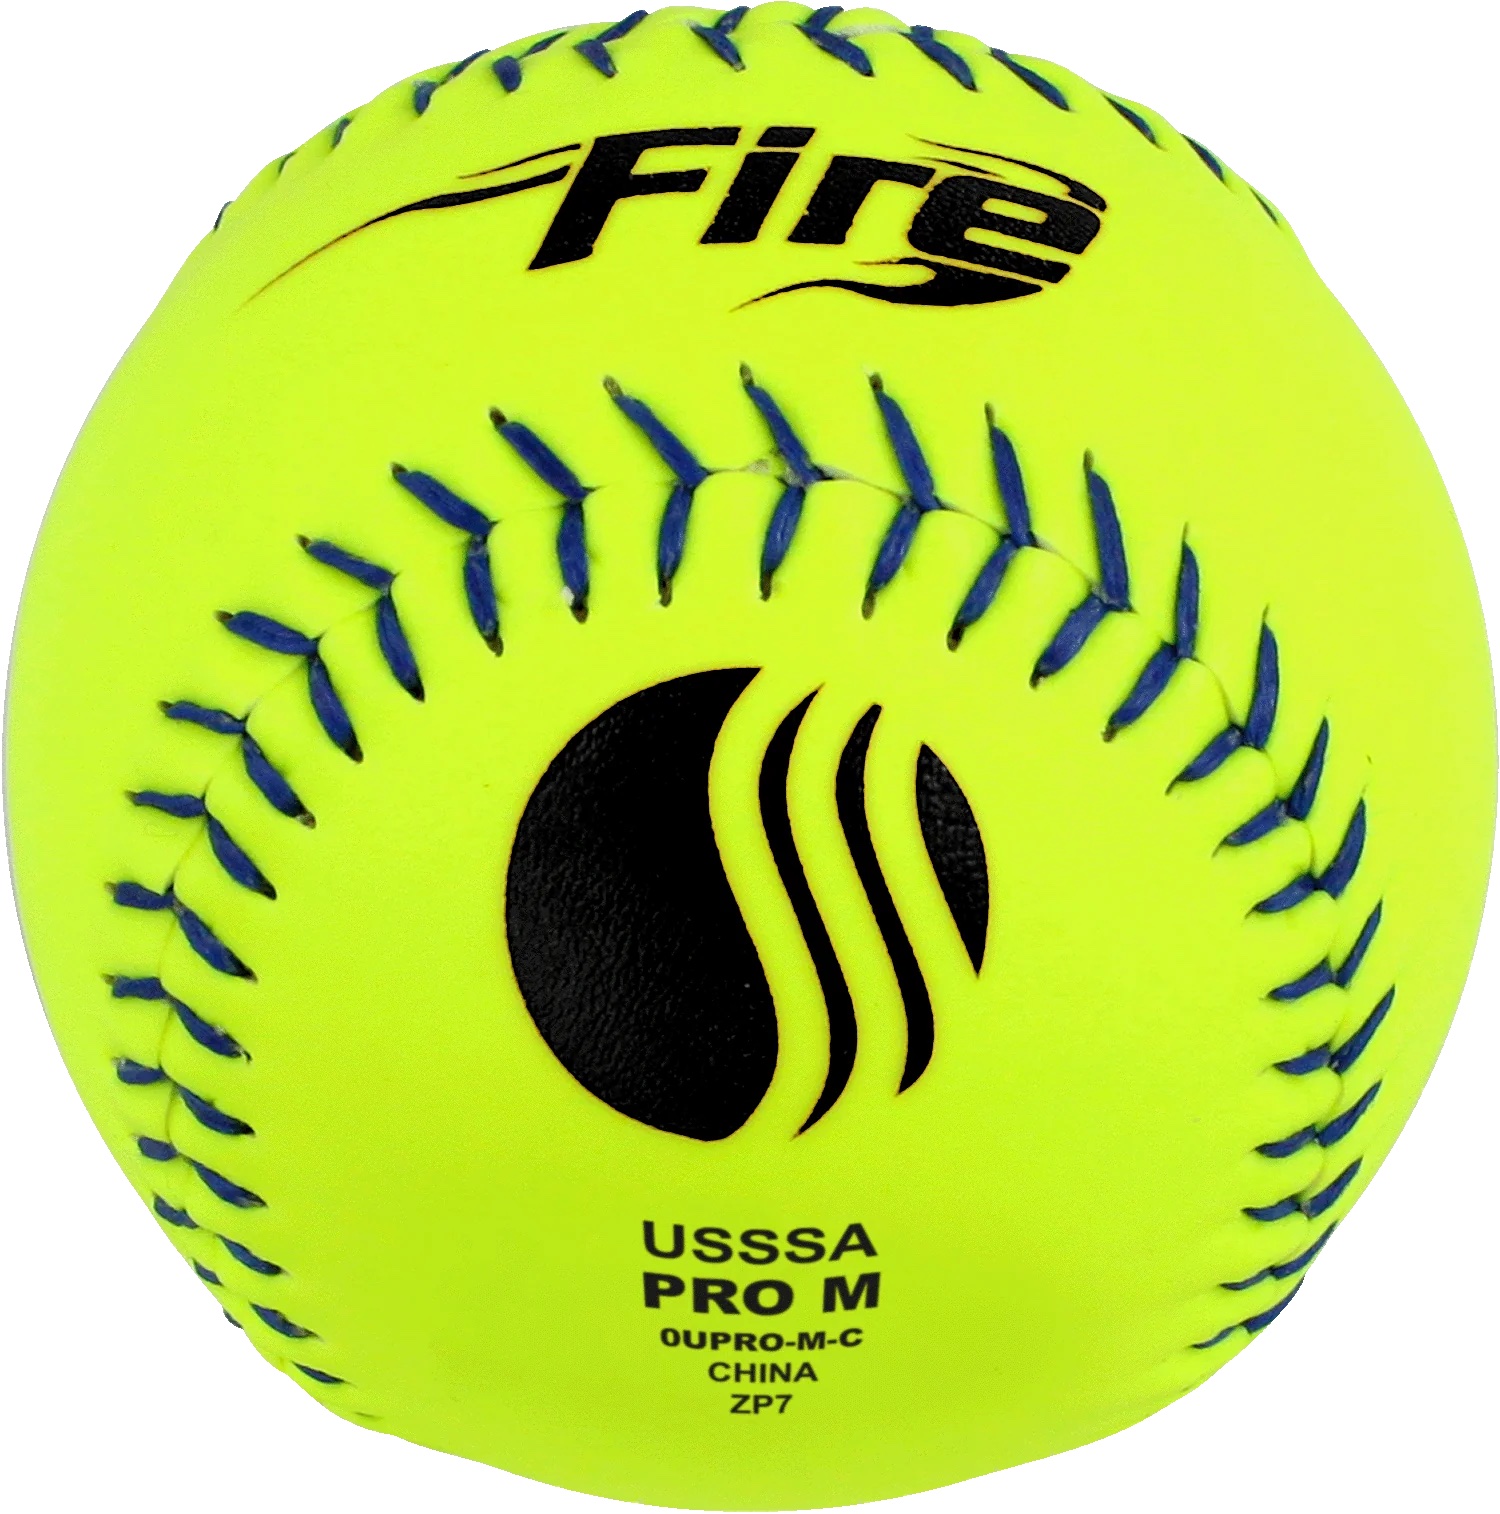 Sports Attack 12 Yellow Dimpled Seamed Softballs